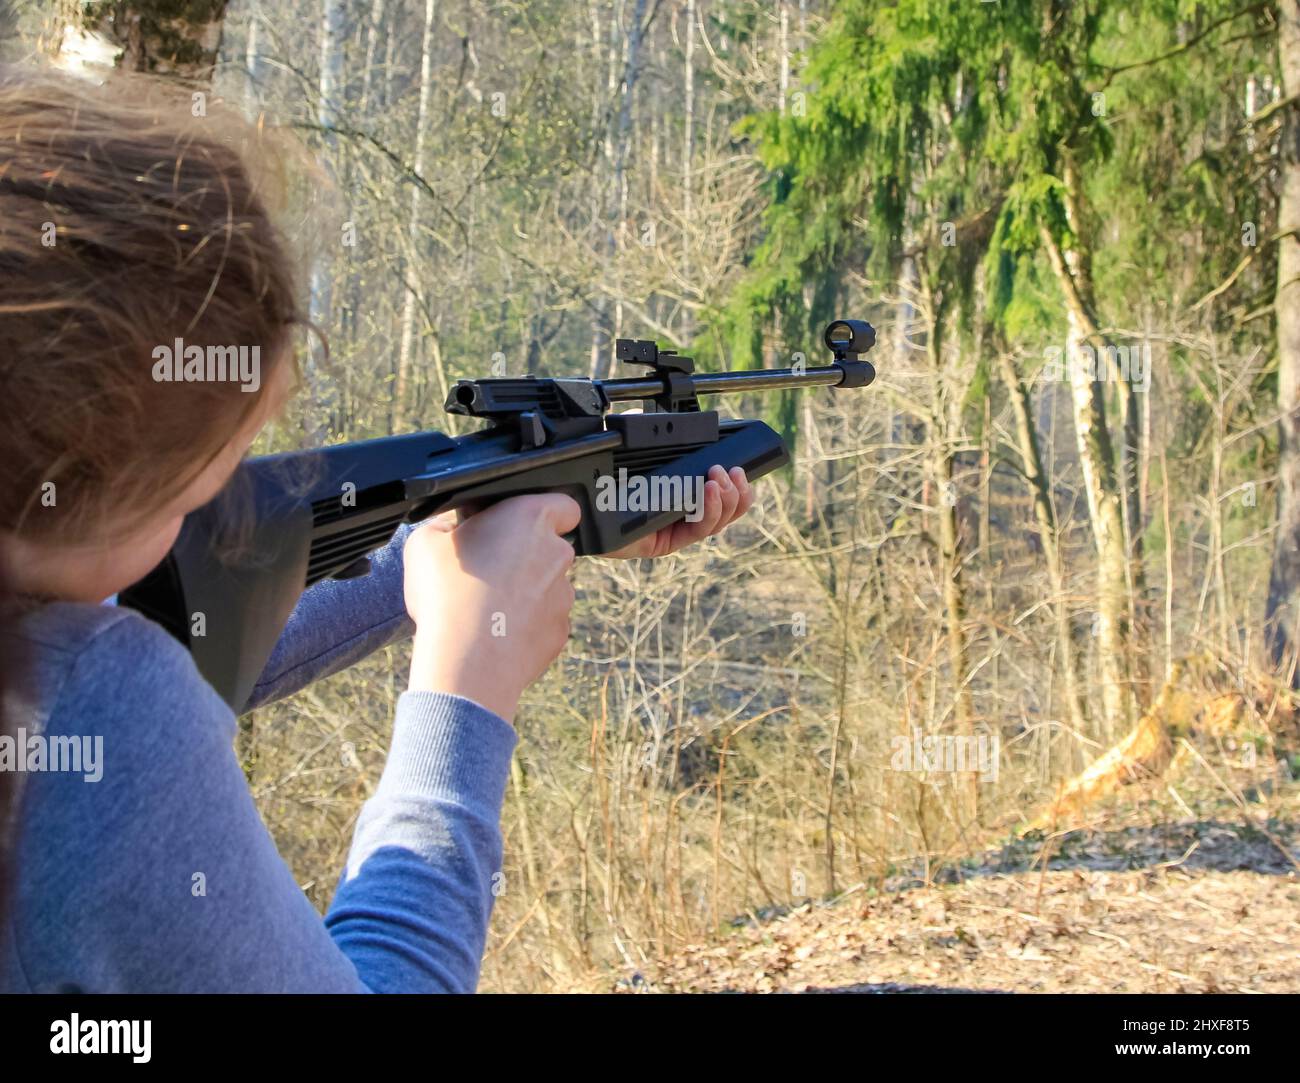 The girl shoots from an air rifle at a target in the forest. Stock Photo